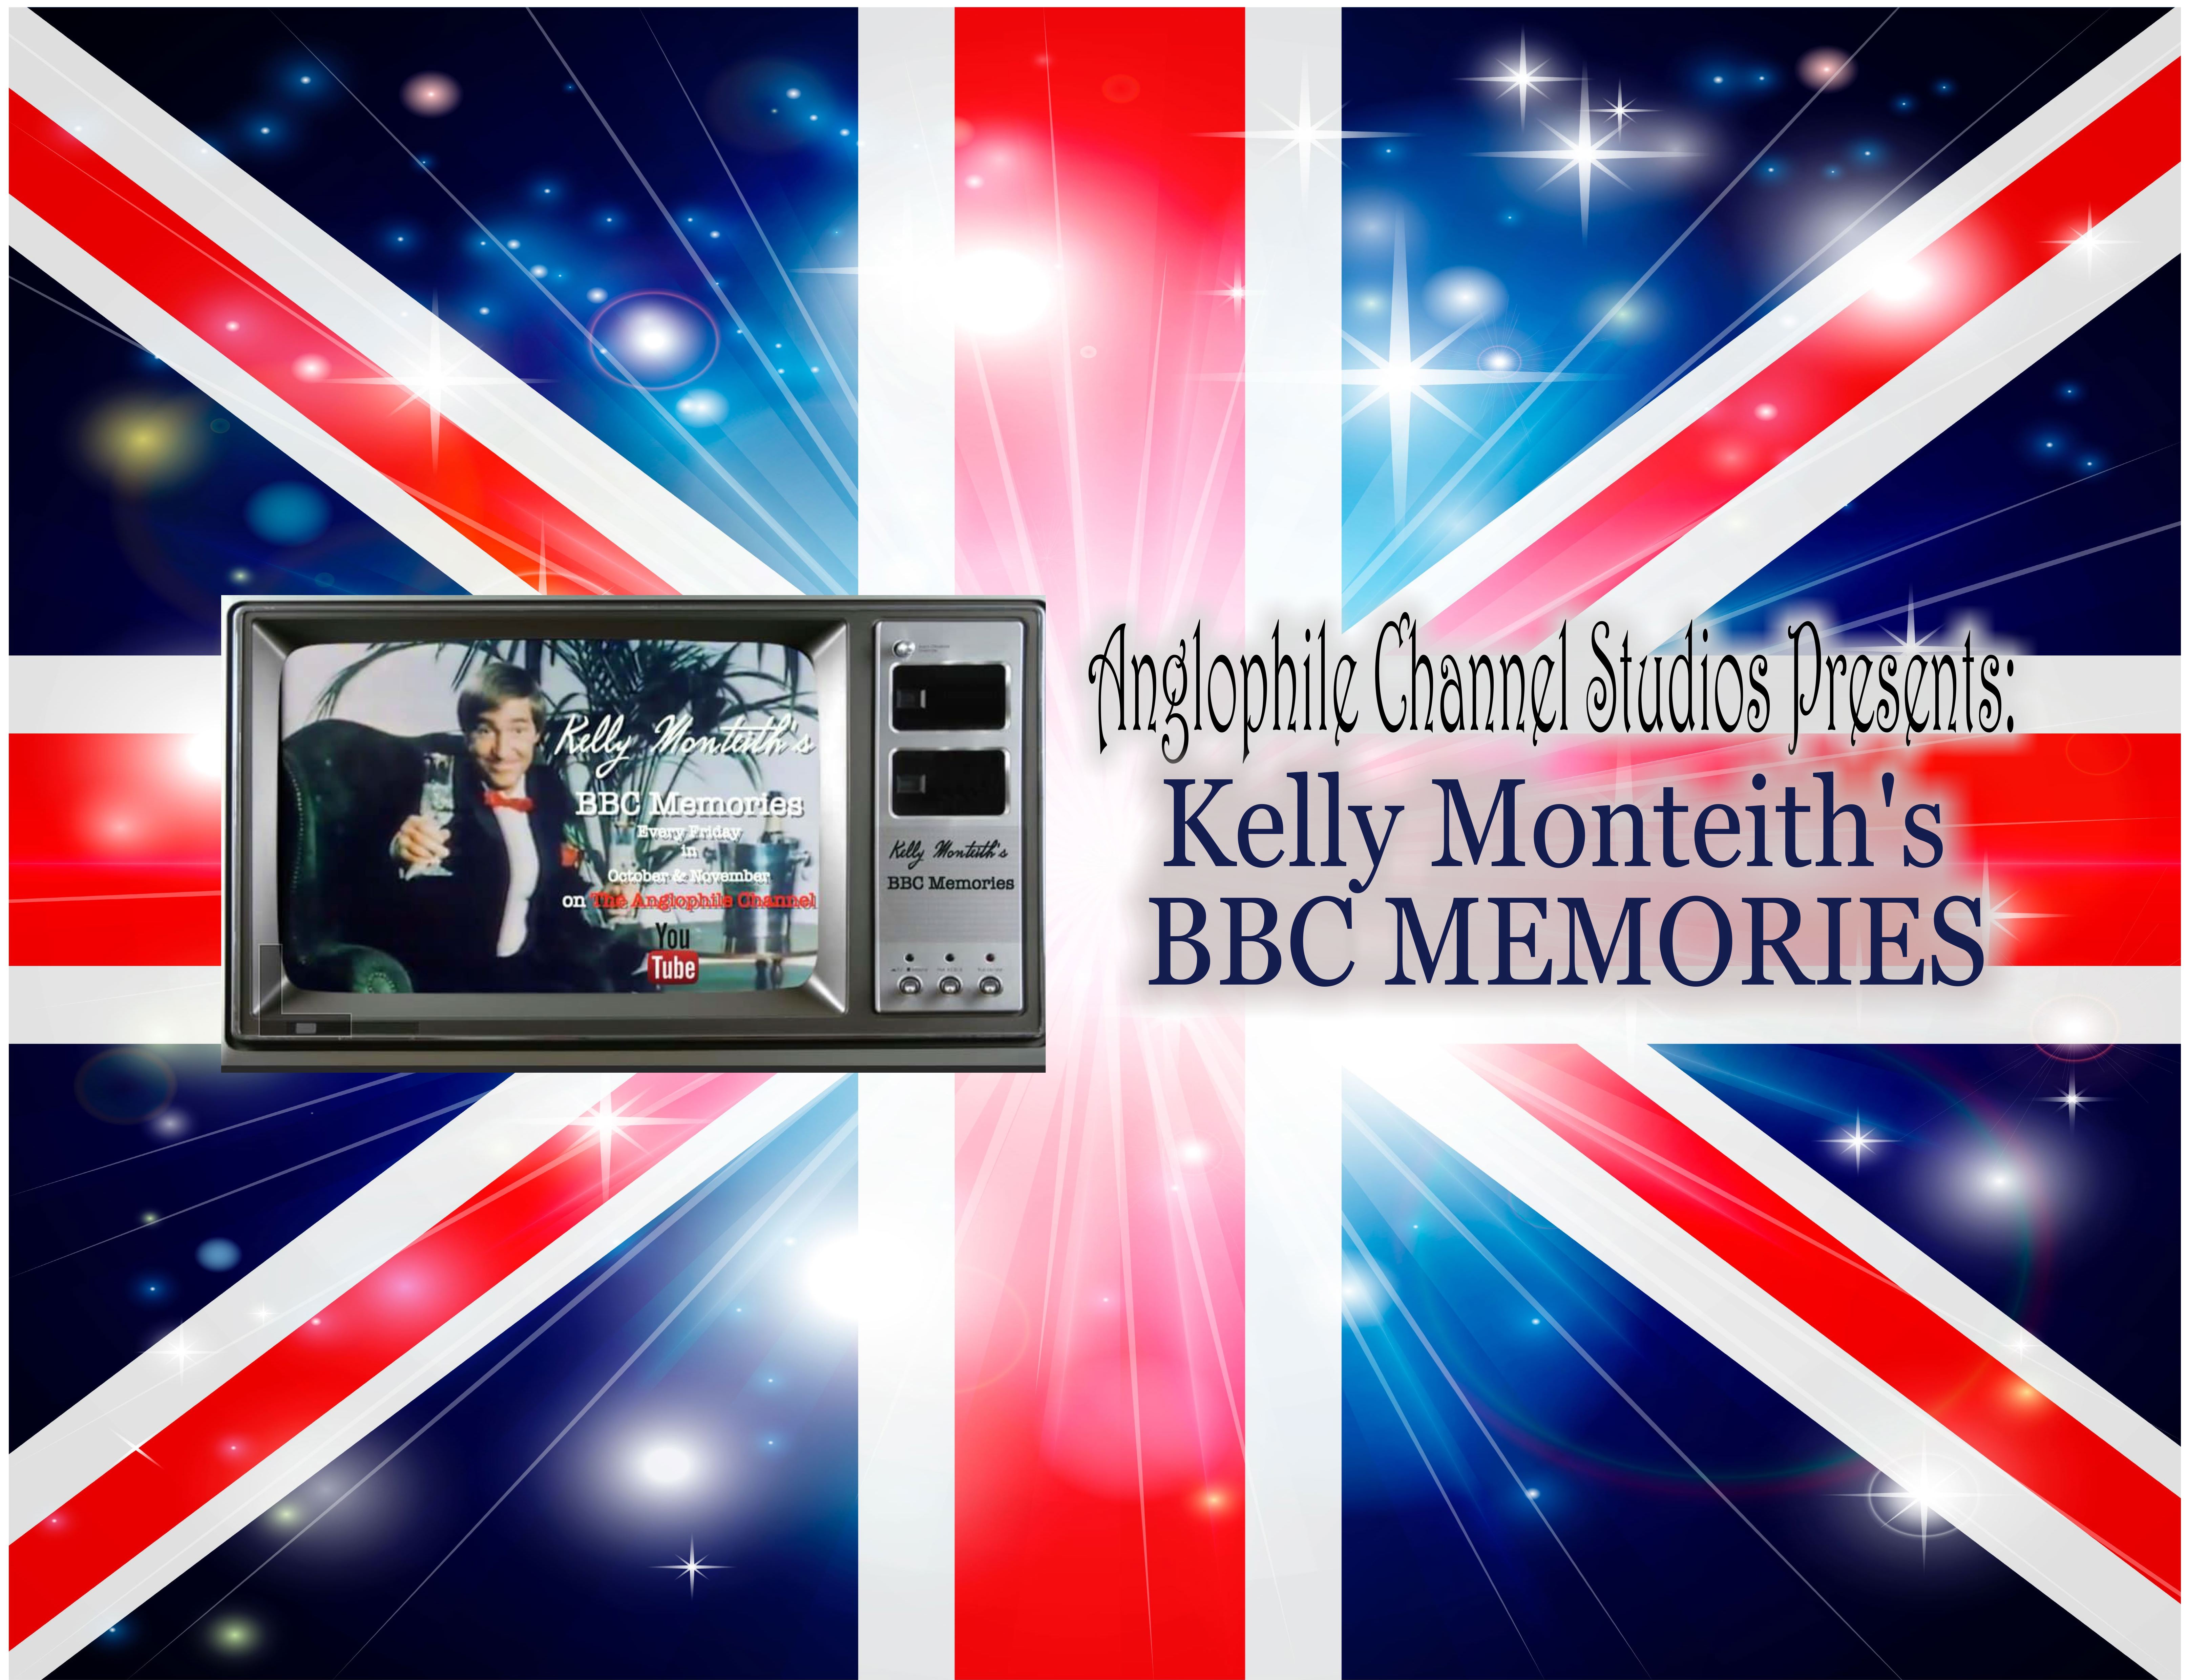 Kelly Monteiths BBC Memories The picture